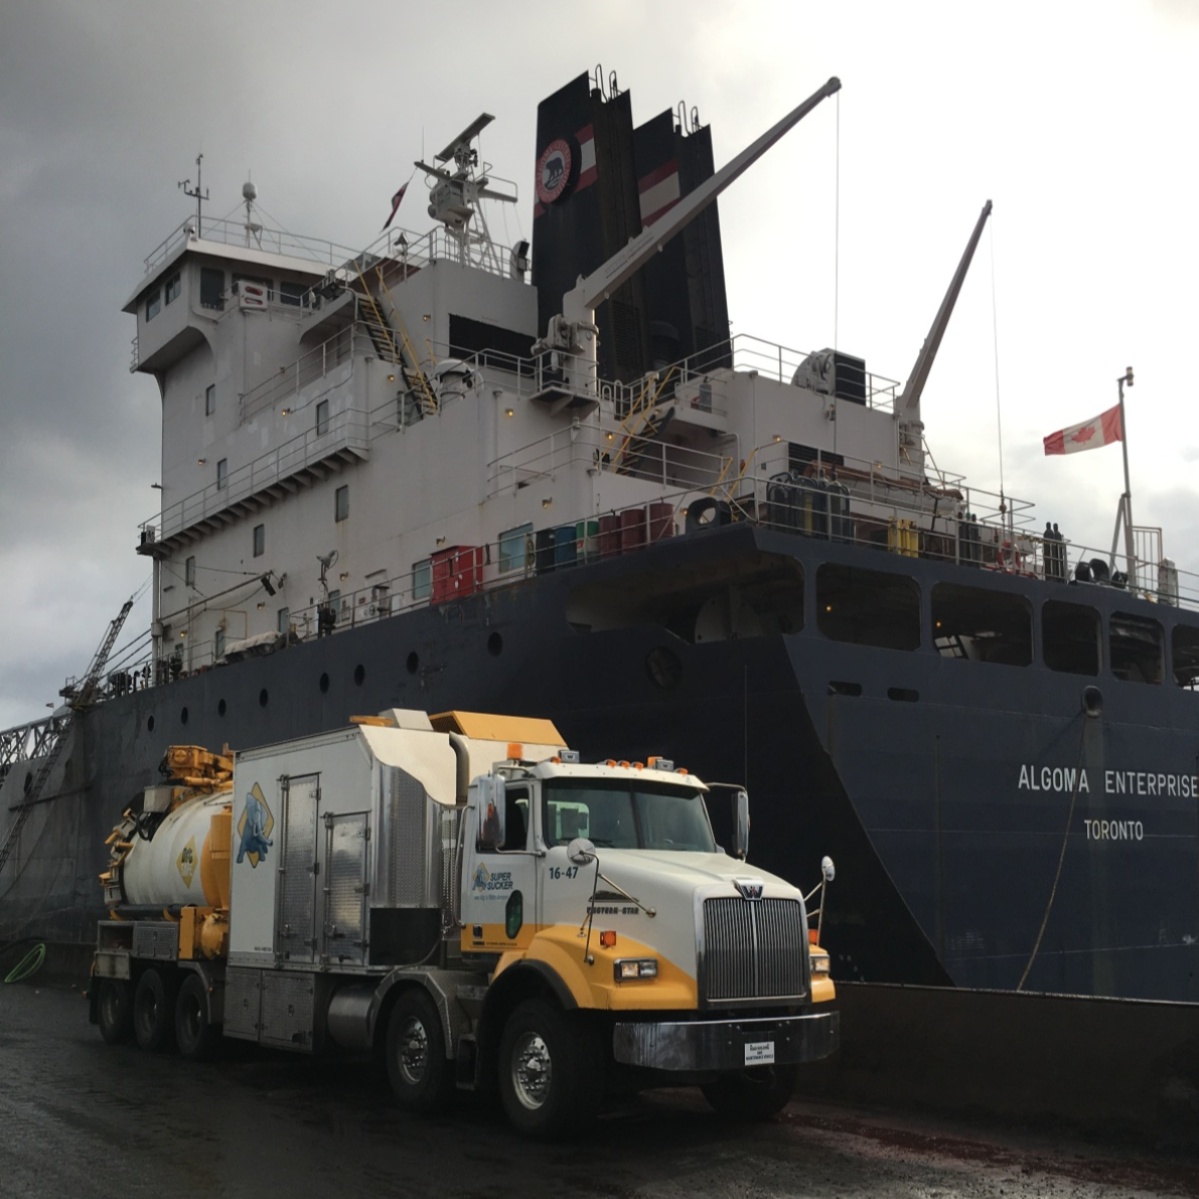 Our diverse fleet allows us to tackle many unique projects! 

Call (905) 297 4695 to book a truck! 

#wegotyourvac #hydrovac #solutionprovider